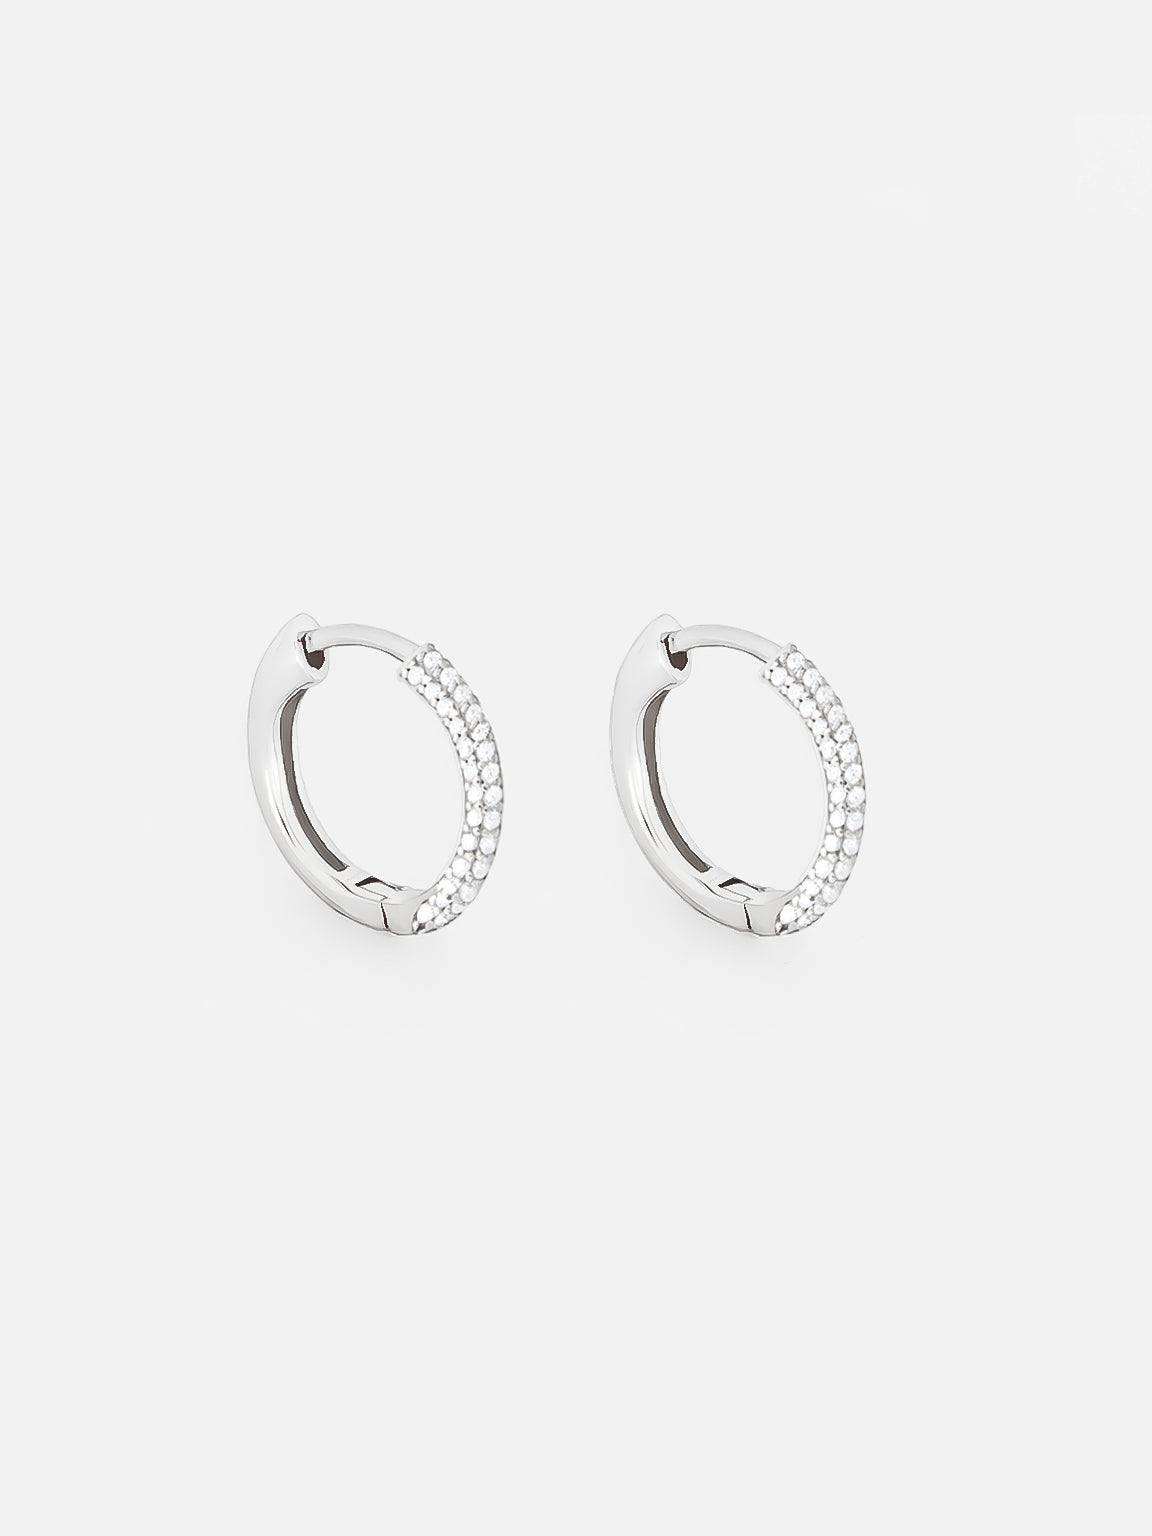 Small Silver Hoop Earrings with Sparkling Pave Stones